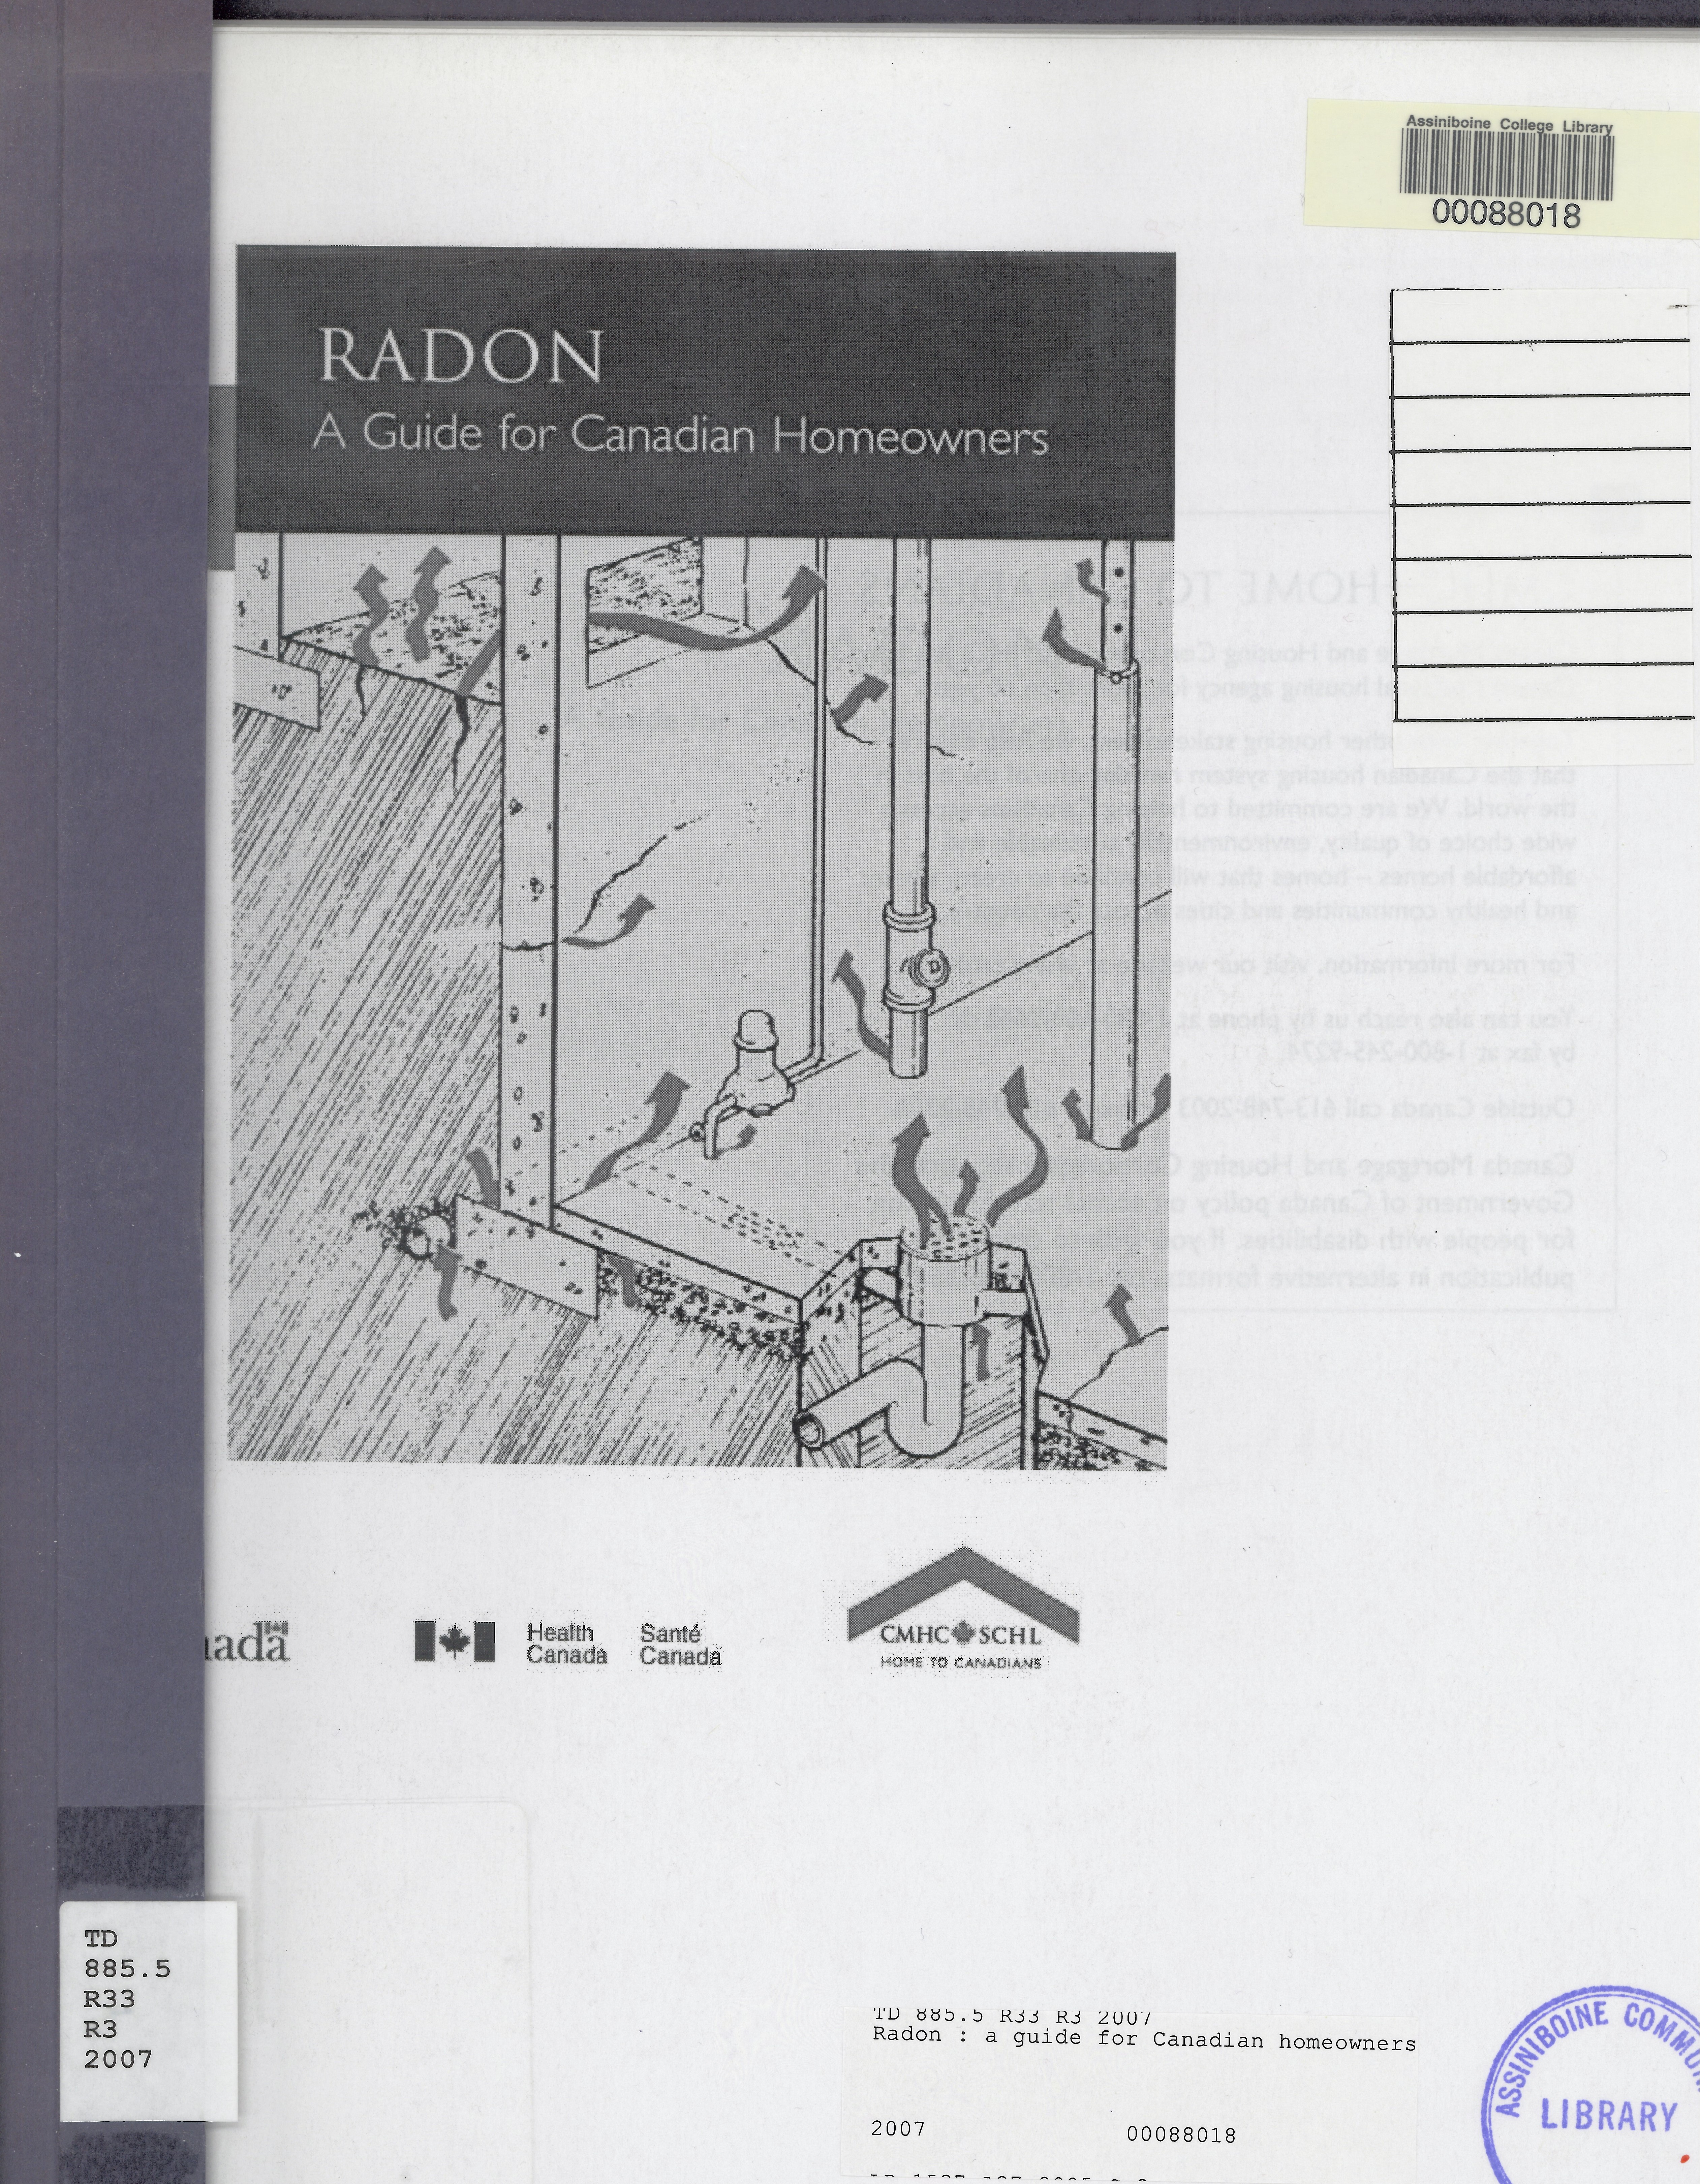 Radon : a guide for Canadian homeowners